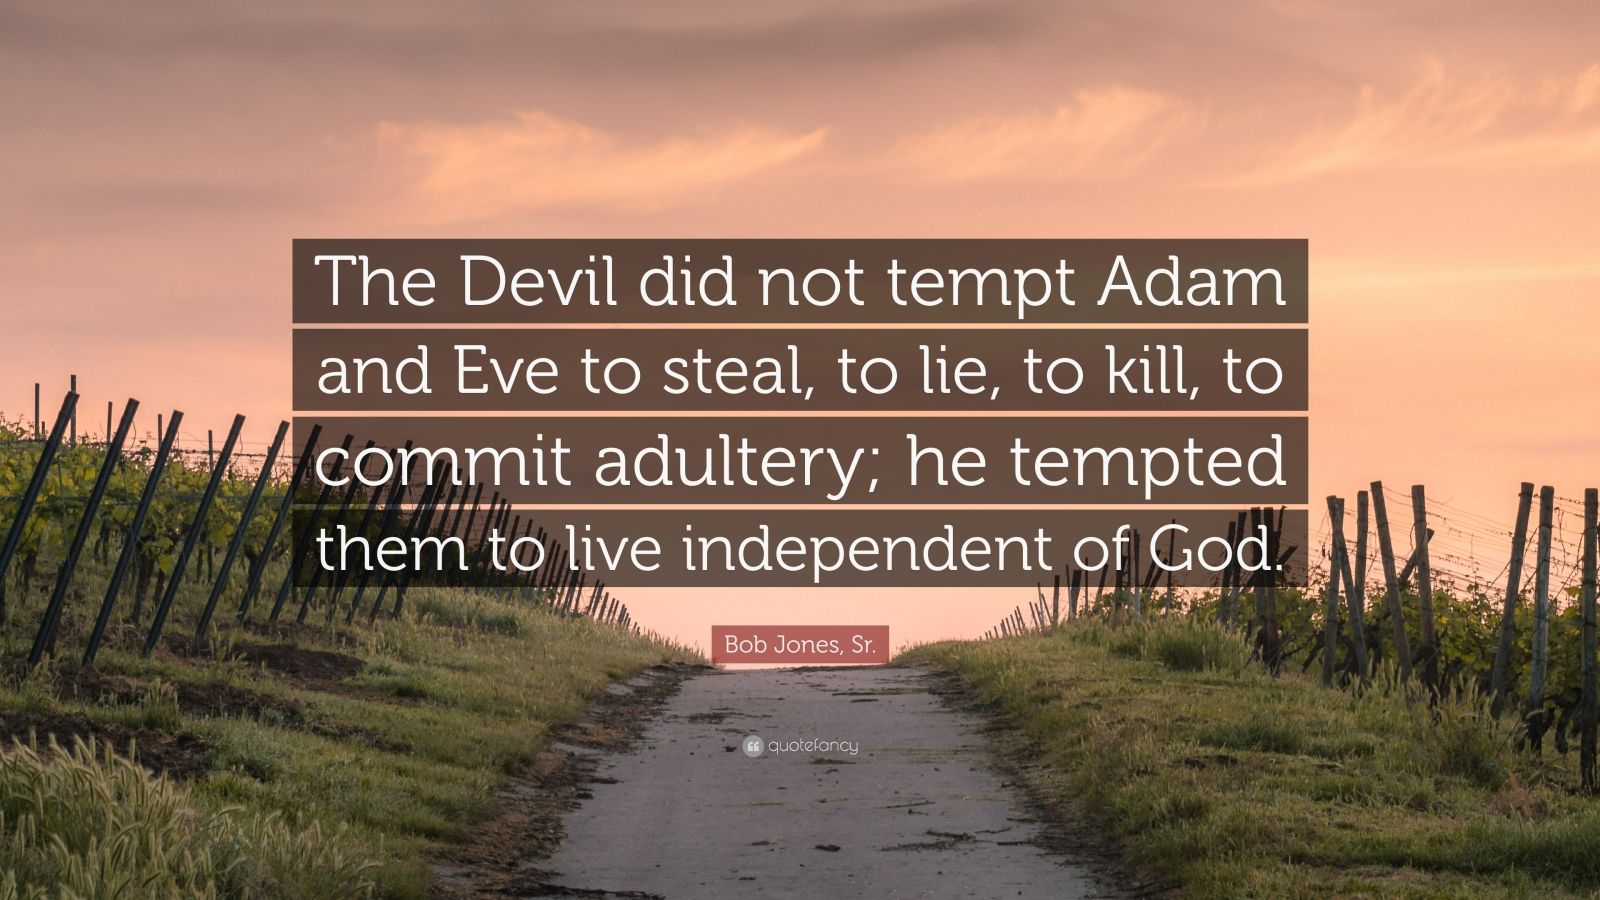 Bob Jones Sr Quote “the Devil Did Not Tempt Adam And Eve To Steal